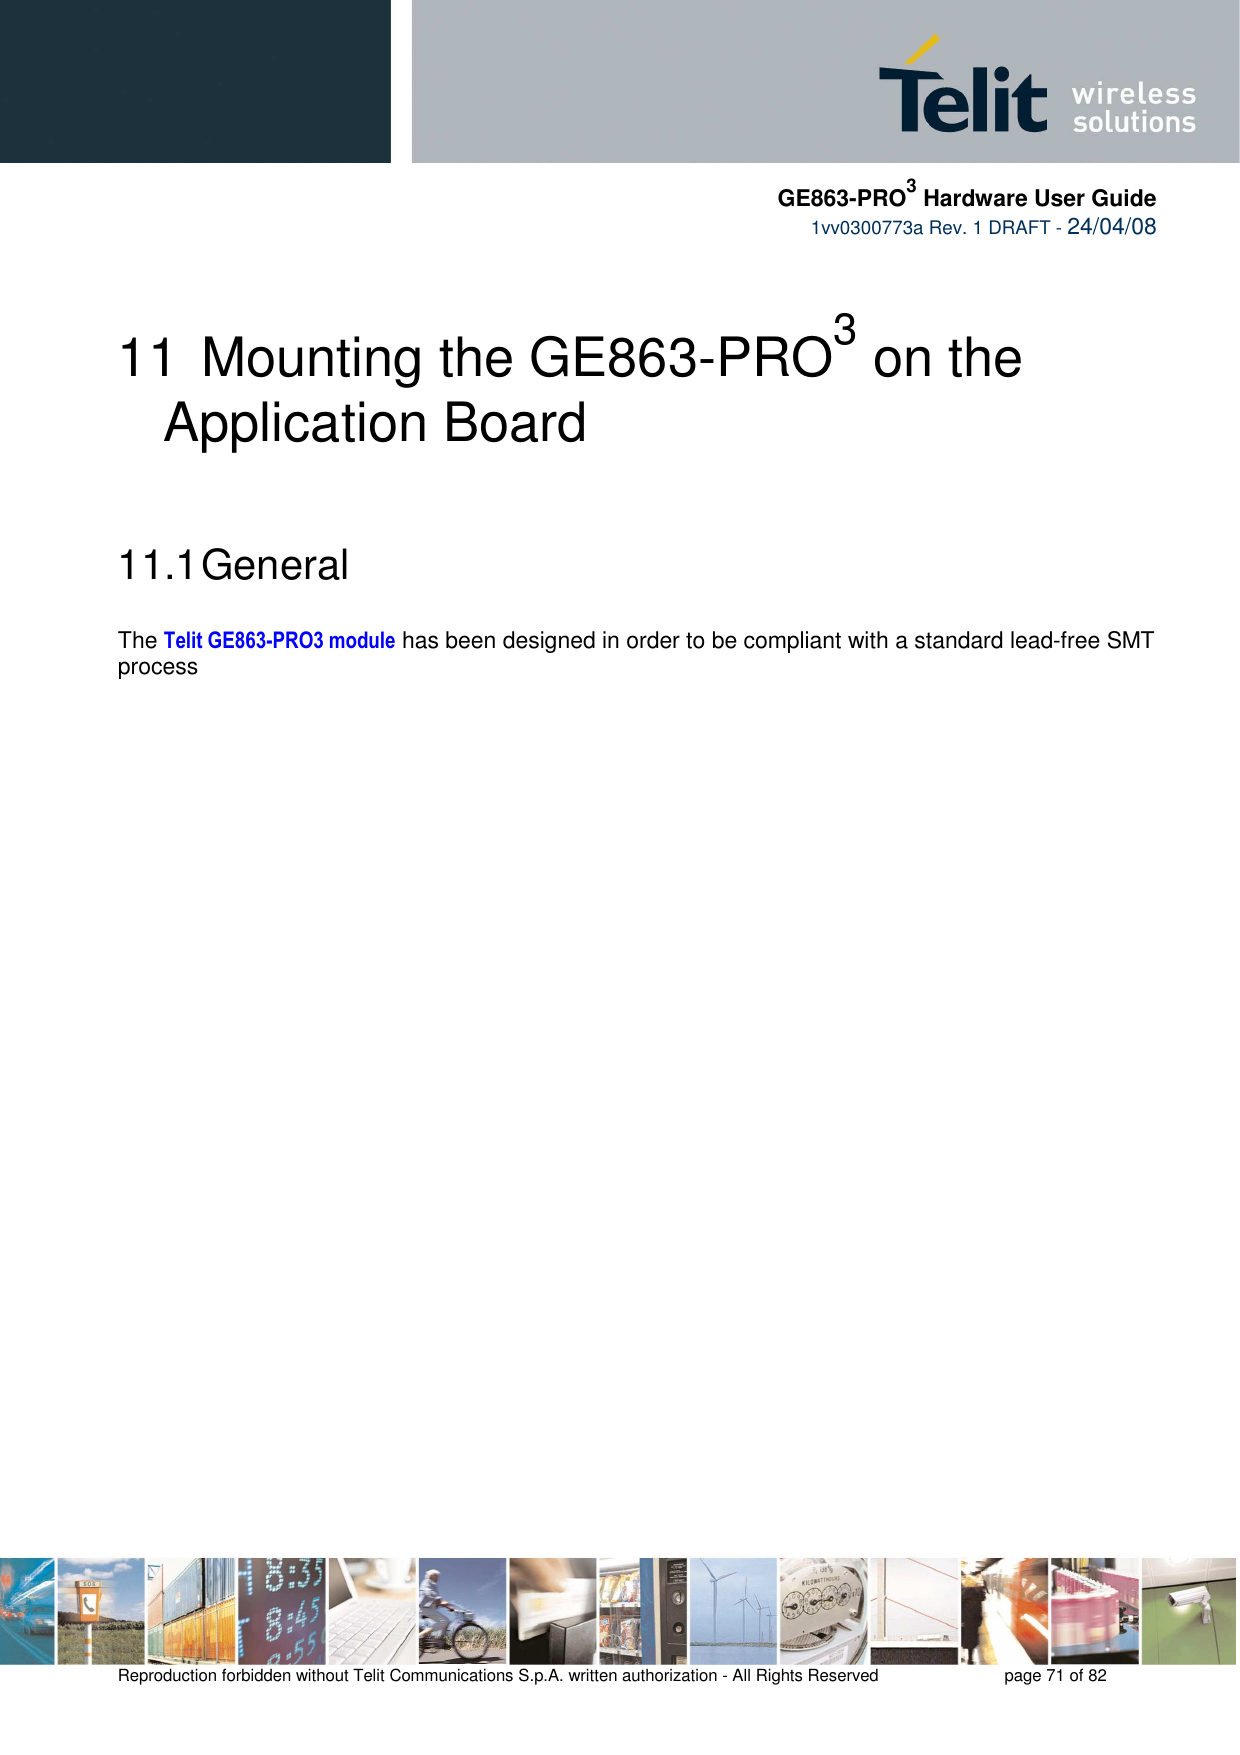     GE863-PRO3 Hardware User Guide  1vv0300773a Rev. 1 DRAFT - 24/04/08    Reproduction forbidden without Telit Communications S.p.A. written authorization - All Rights Reserved    page 71 of 82  11 Mounting the GE863-PRO3 on the Application Board 11.1 General  The Telit GE863-PRO3 module has been designed in order to be compliant with a standard lead-free SMT process   